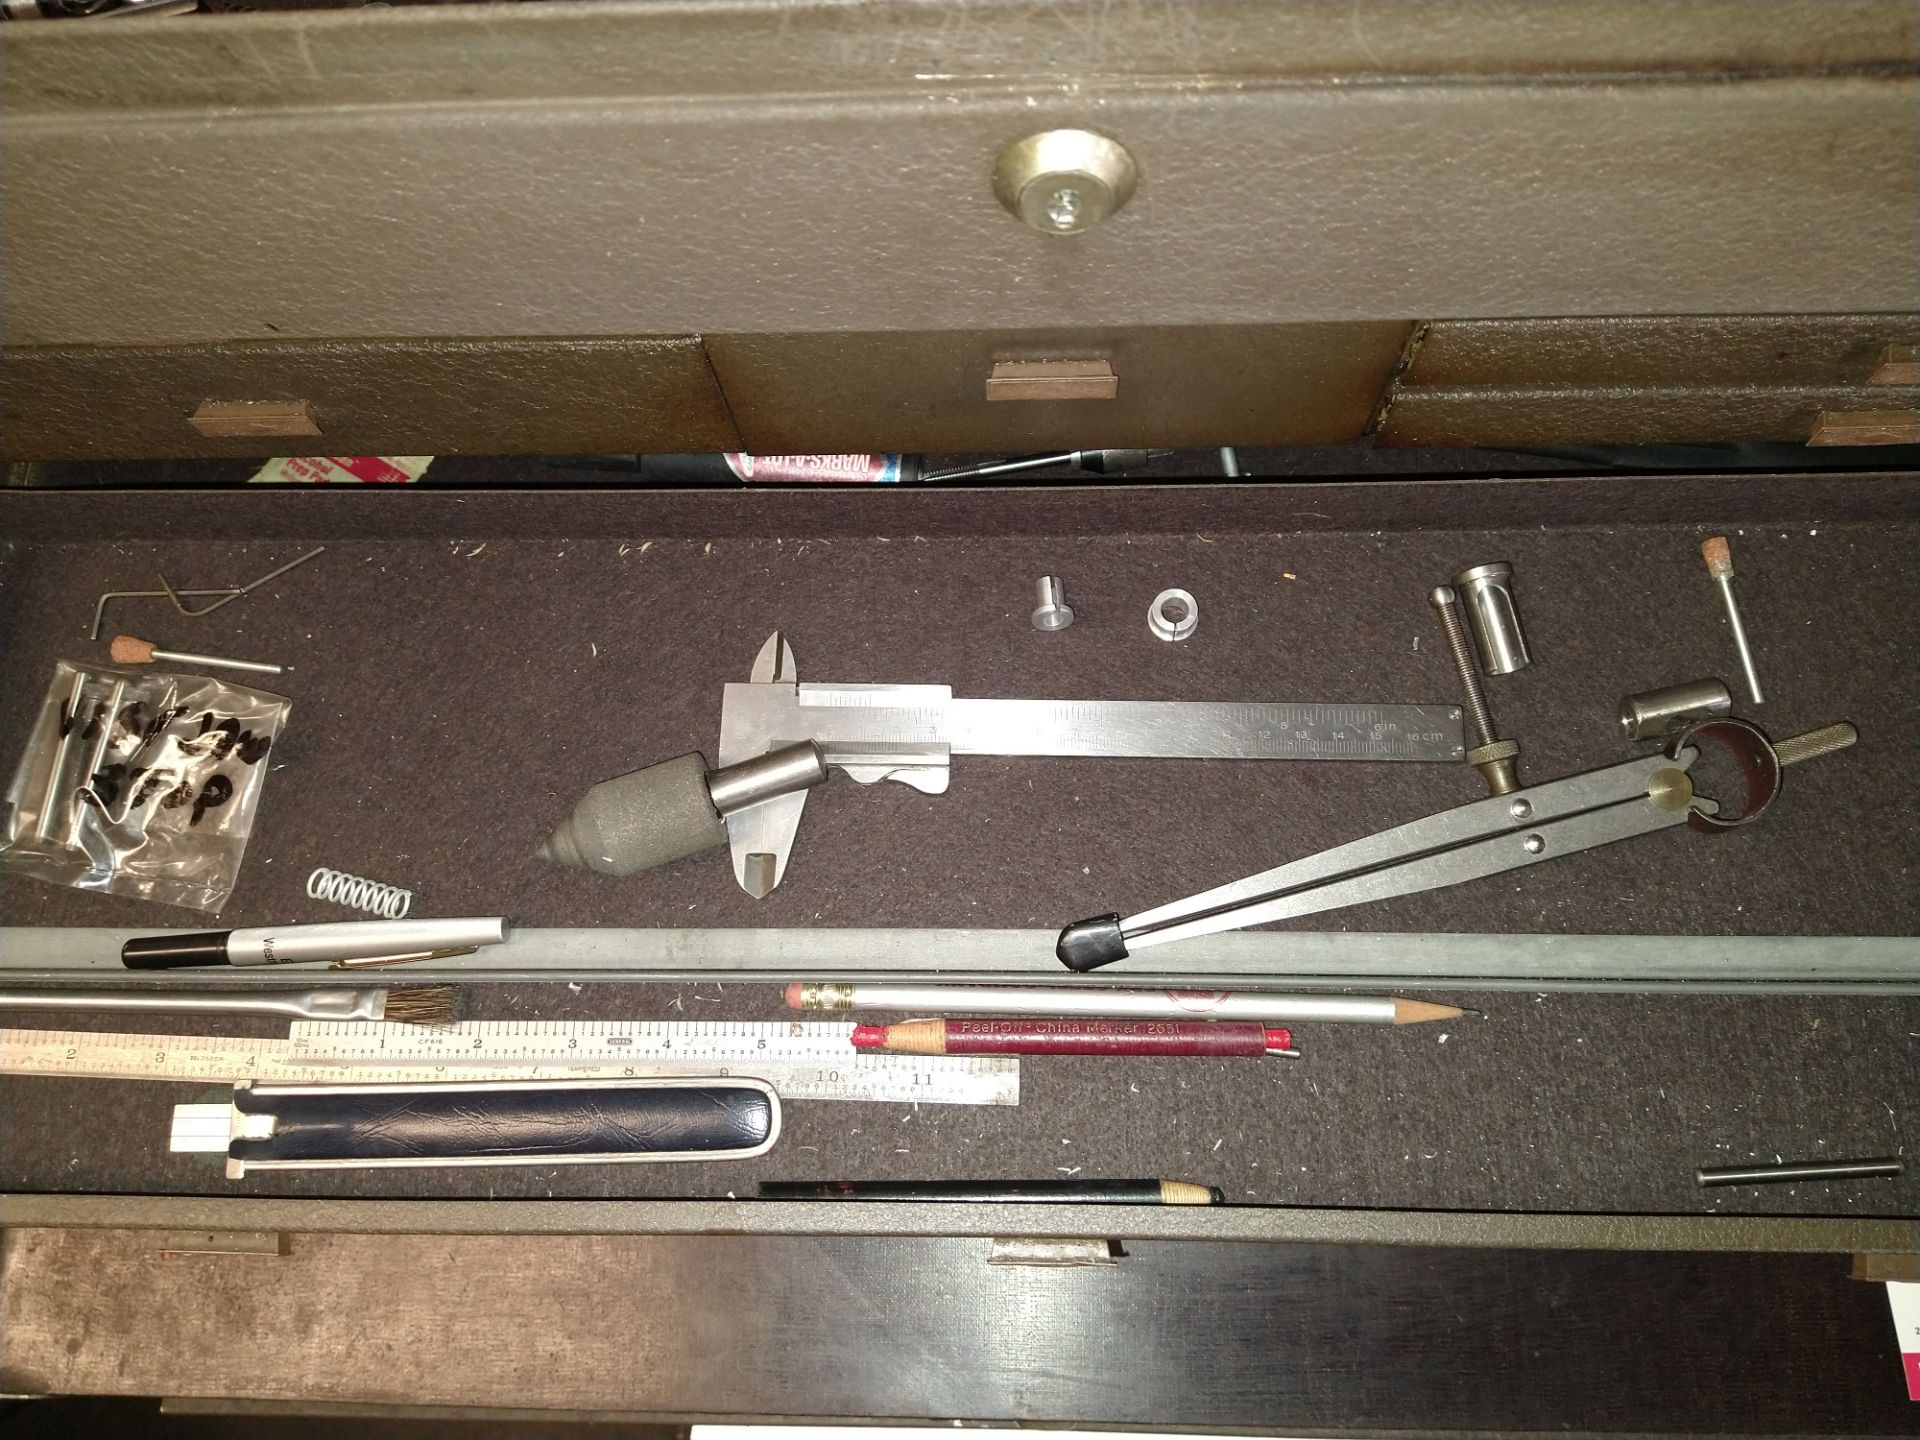 KENNEDY 15-DRAWER TOOL BOX, TOP/BOTTOM, W/ CONTENTS - Image 4 of 12